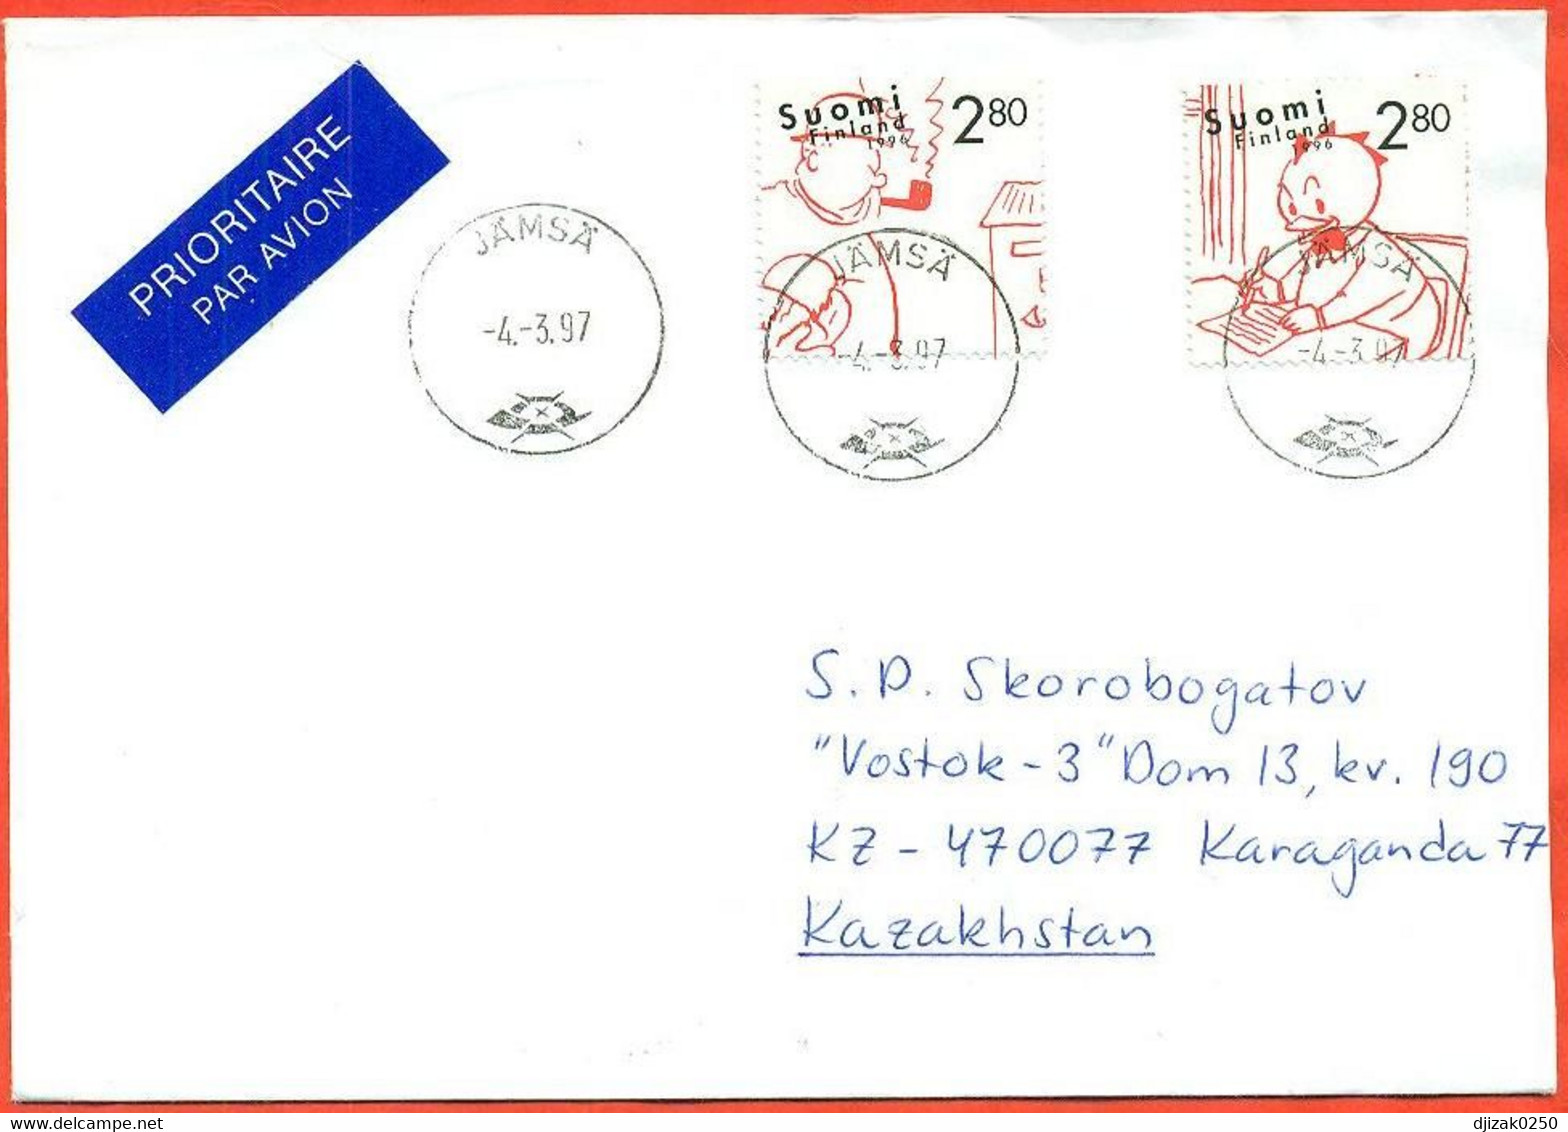 Finland 1997.The Envelope Passed Through The Mail. Airmail. - Lettres & Documents